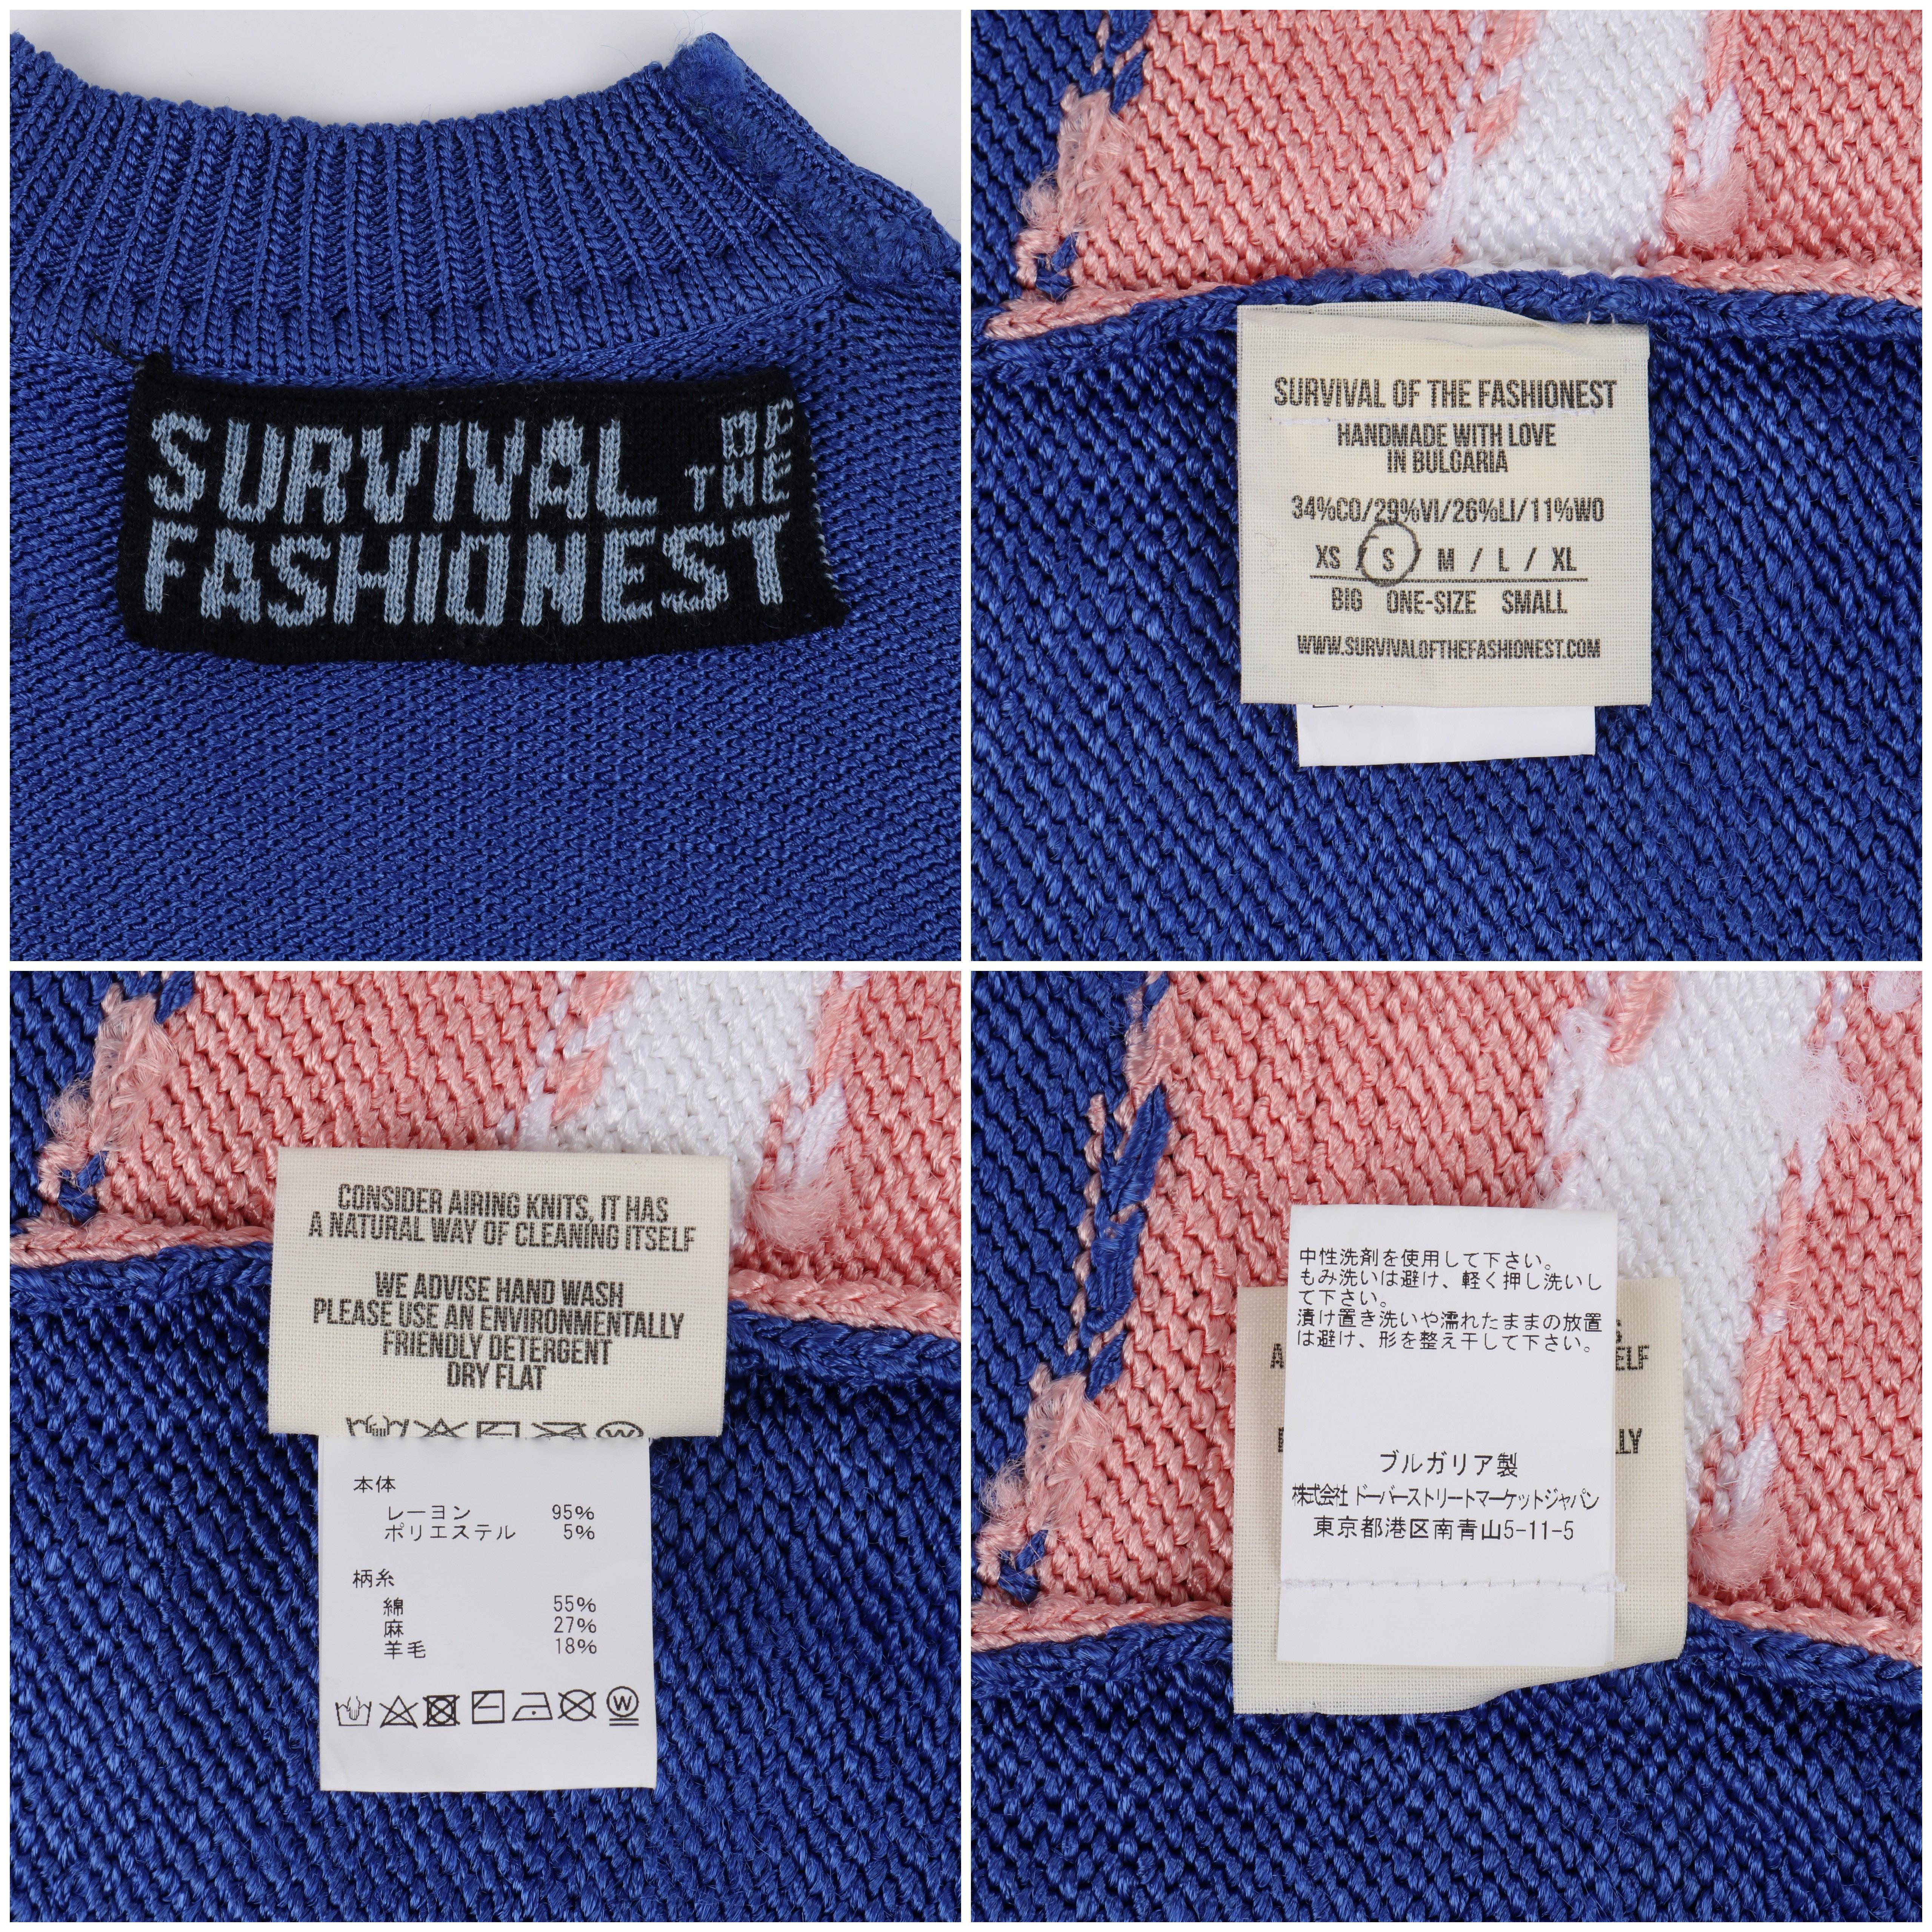 SURVIVAL OF THE FASHIONEST F/S 2020 Blauer Strick Pullover mit smiley Face Pullover Top S im Angebot 8